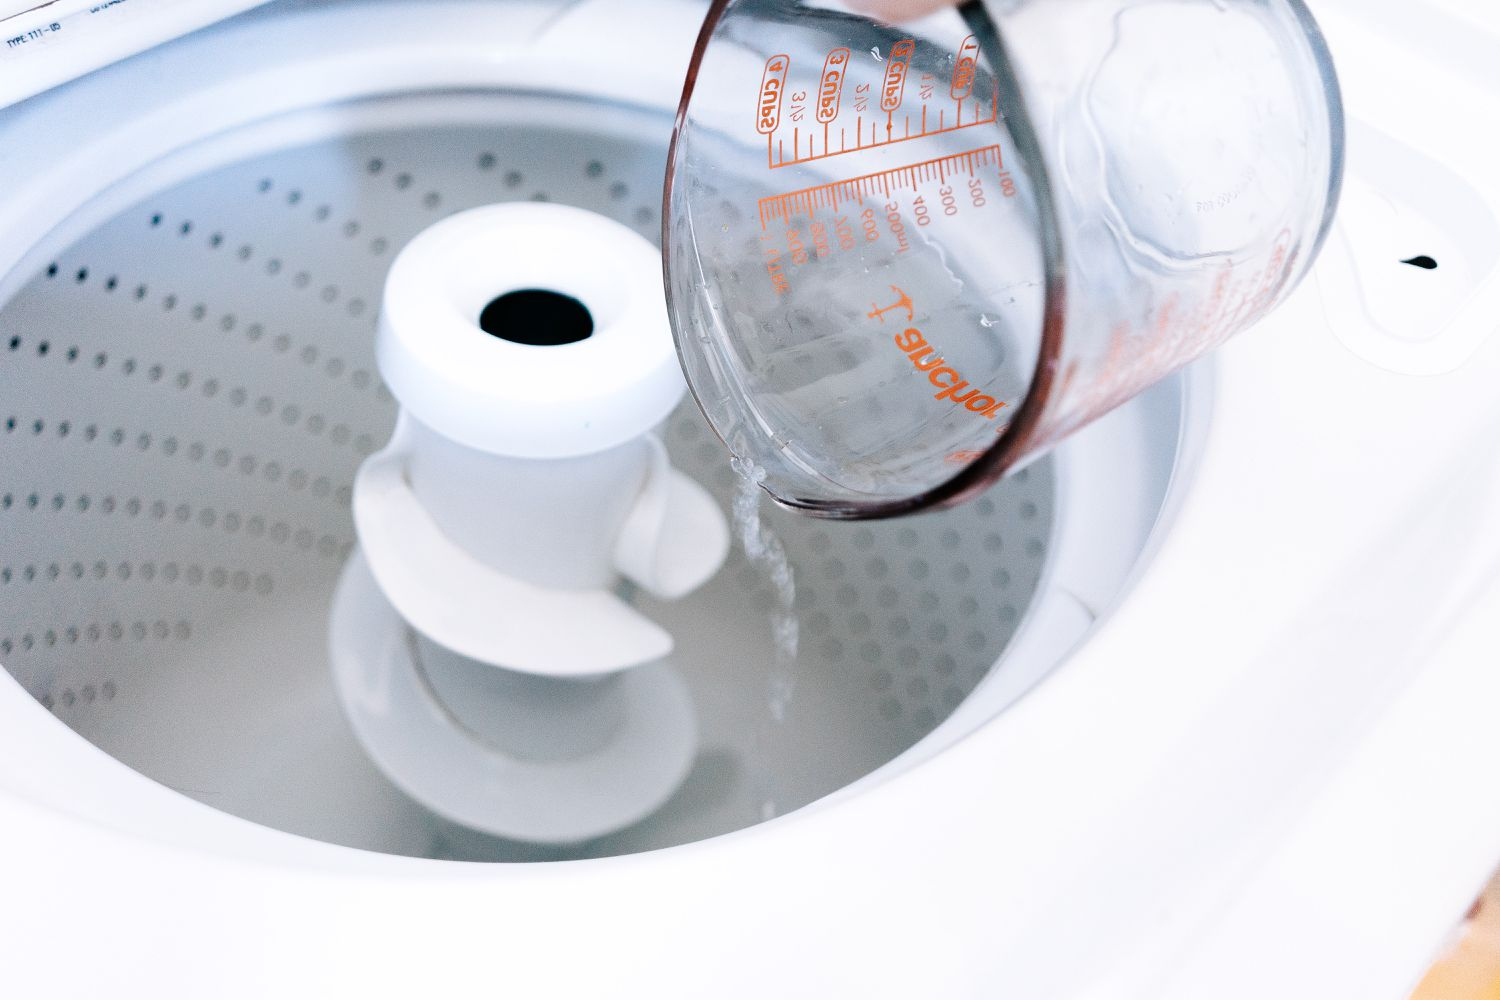 How to Clean and Sanitize Your Washing Machine Inside and Out - Dengarden